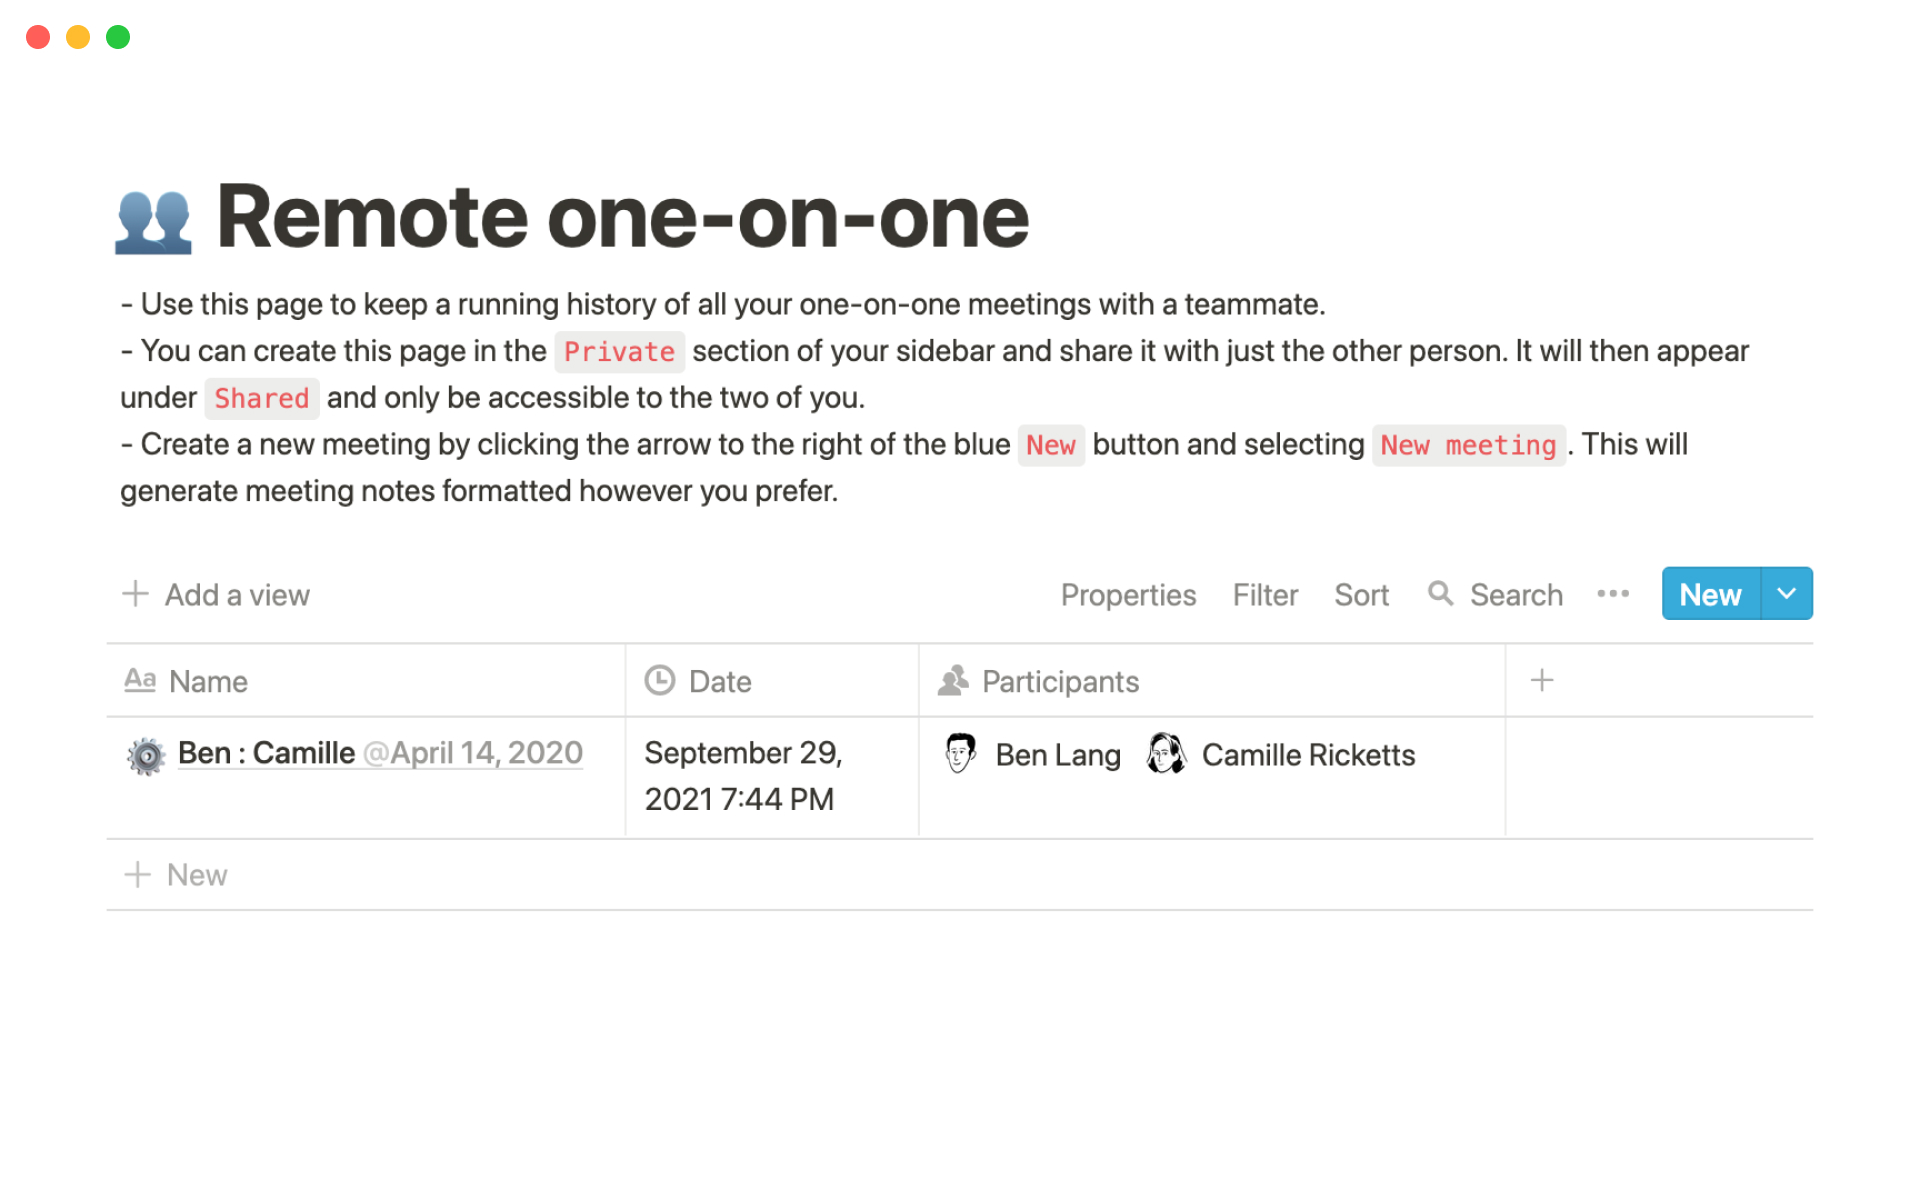 The desktop image for the Remote one-on-one template